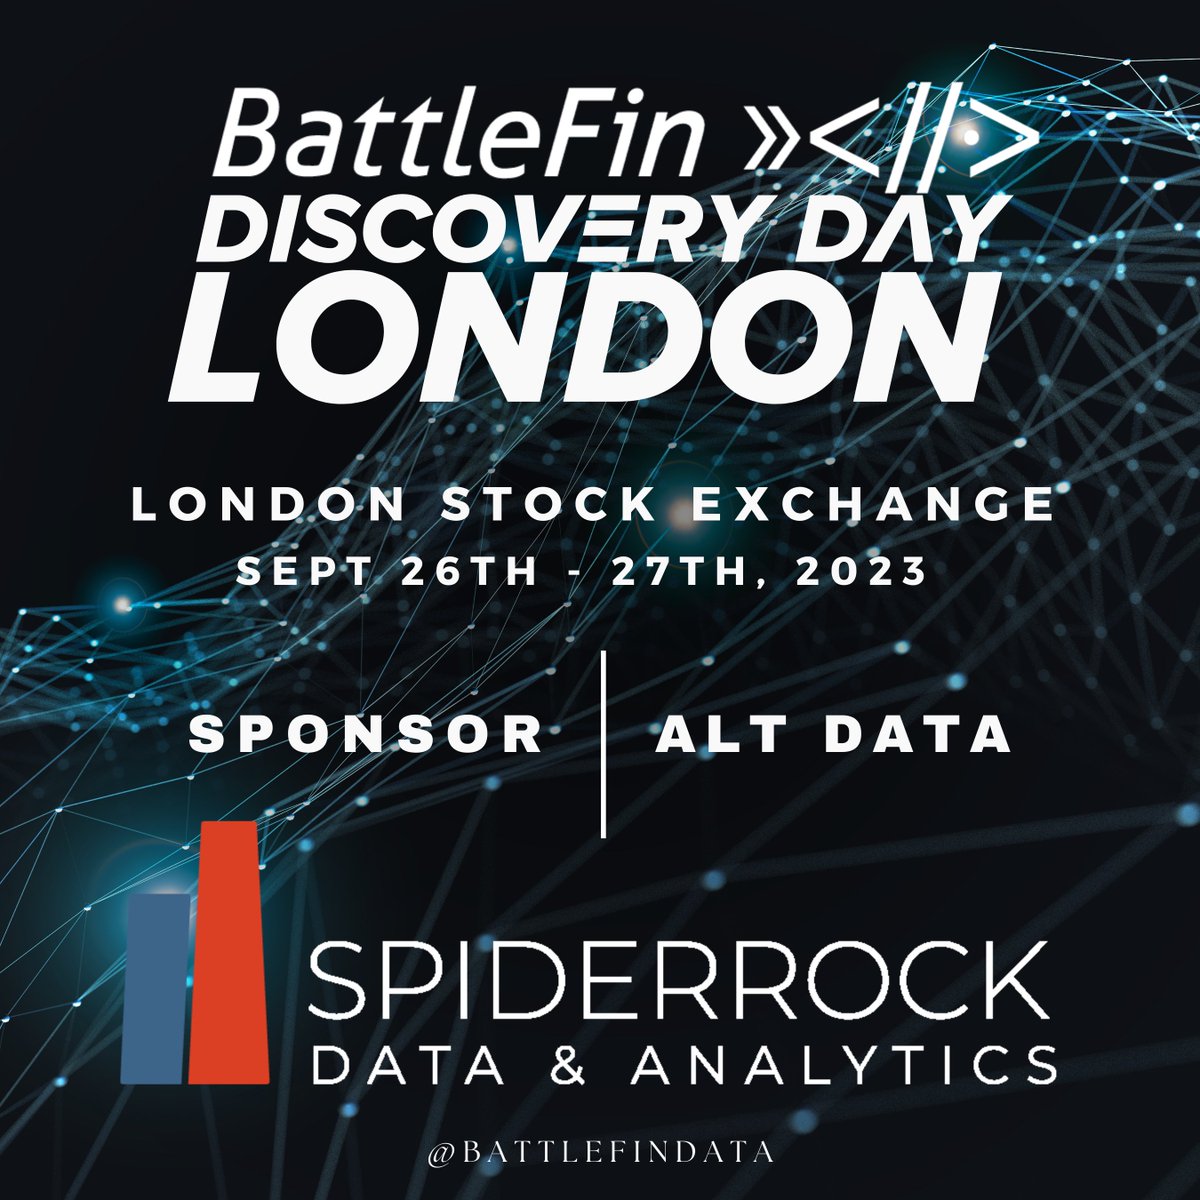 Craig Iseli and Kasia Kobylarz will be attending BattleFin’s largest European event of the year on September 26-27th at Discovery Day London, SpiderRock will be having one-on-one meetings to learn more about our offerings and meet the team! Learn more: battlefin.com/events/london-…